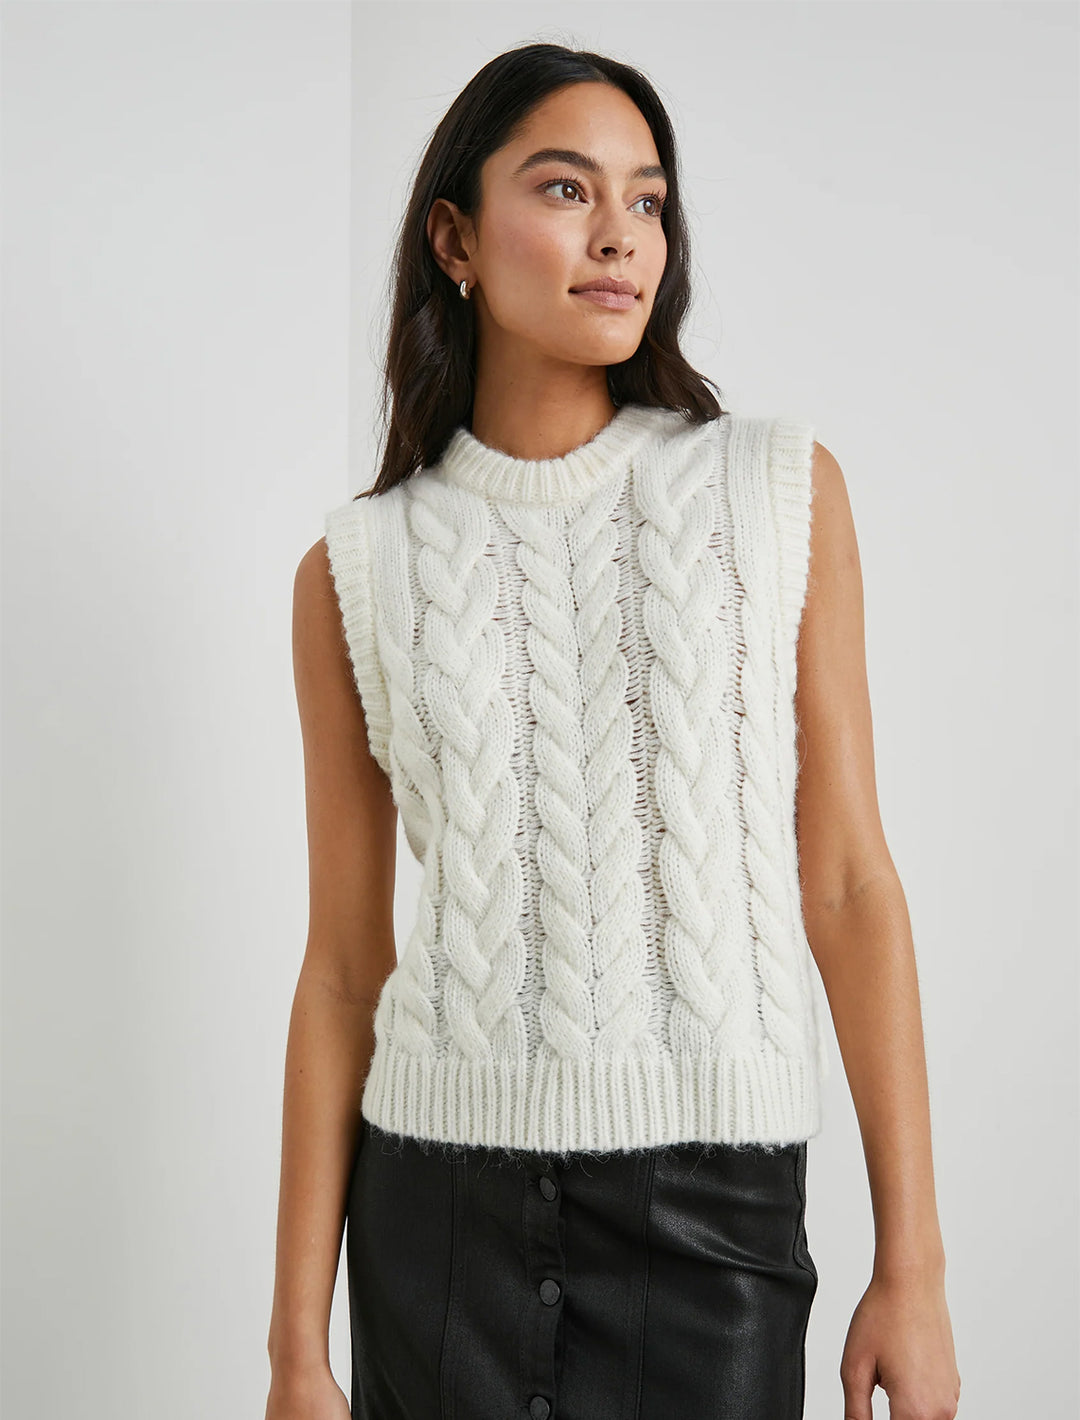 model wearing alexis sweater vest in ivory with a black leather skirt